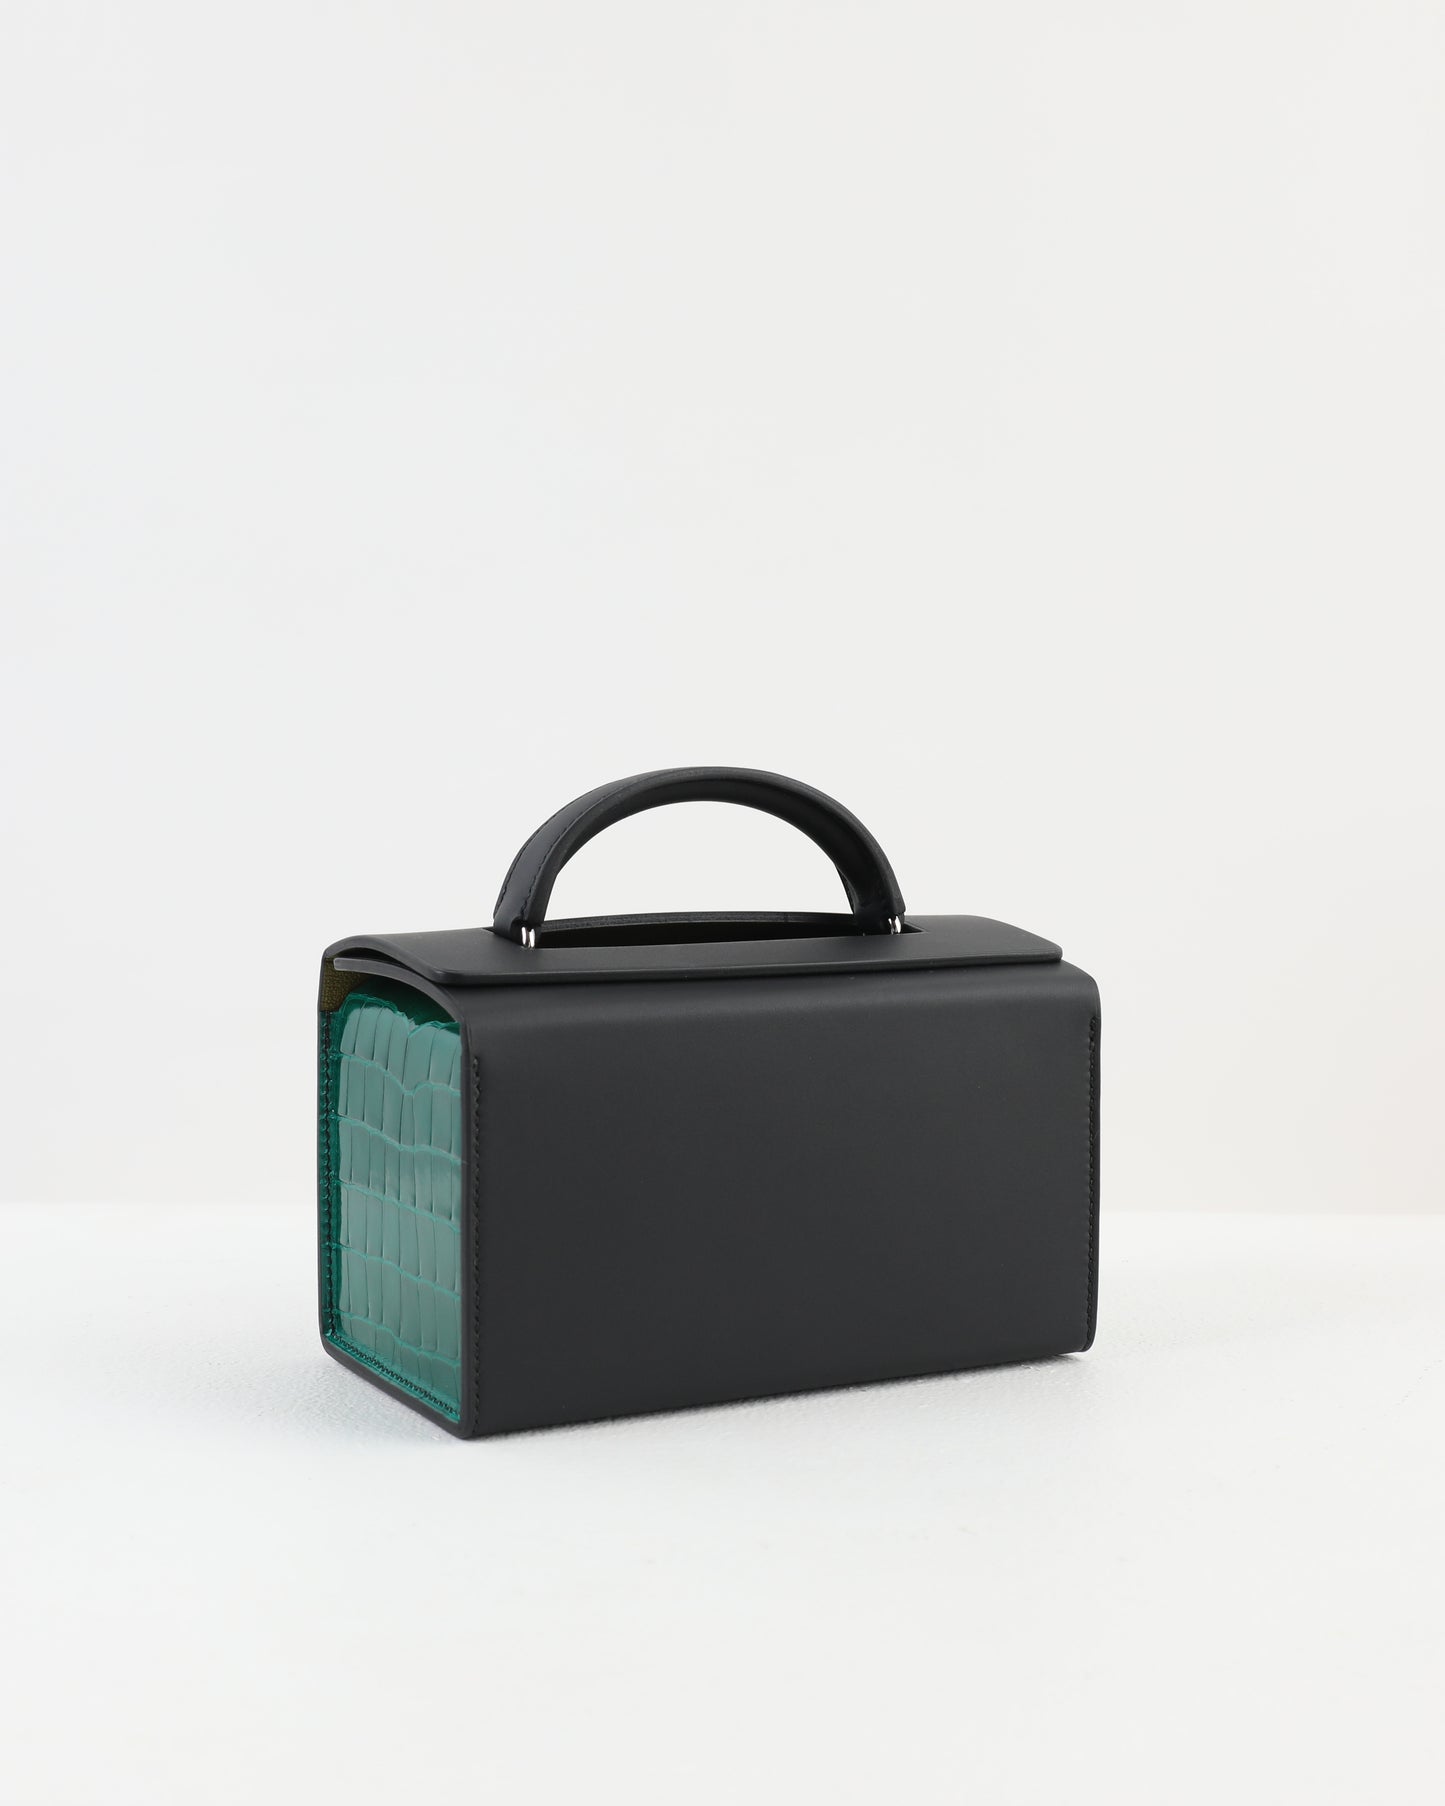 Petit H Boxbag in Hunter Cowhide & Emerald Green Shiny Alligator with Brass Hardware